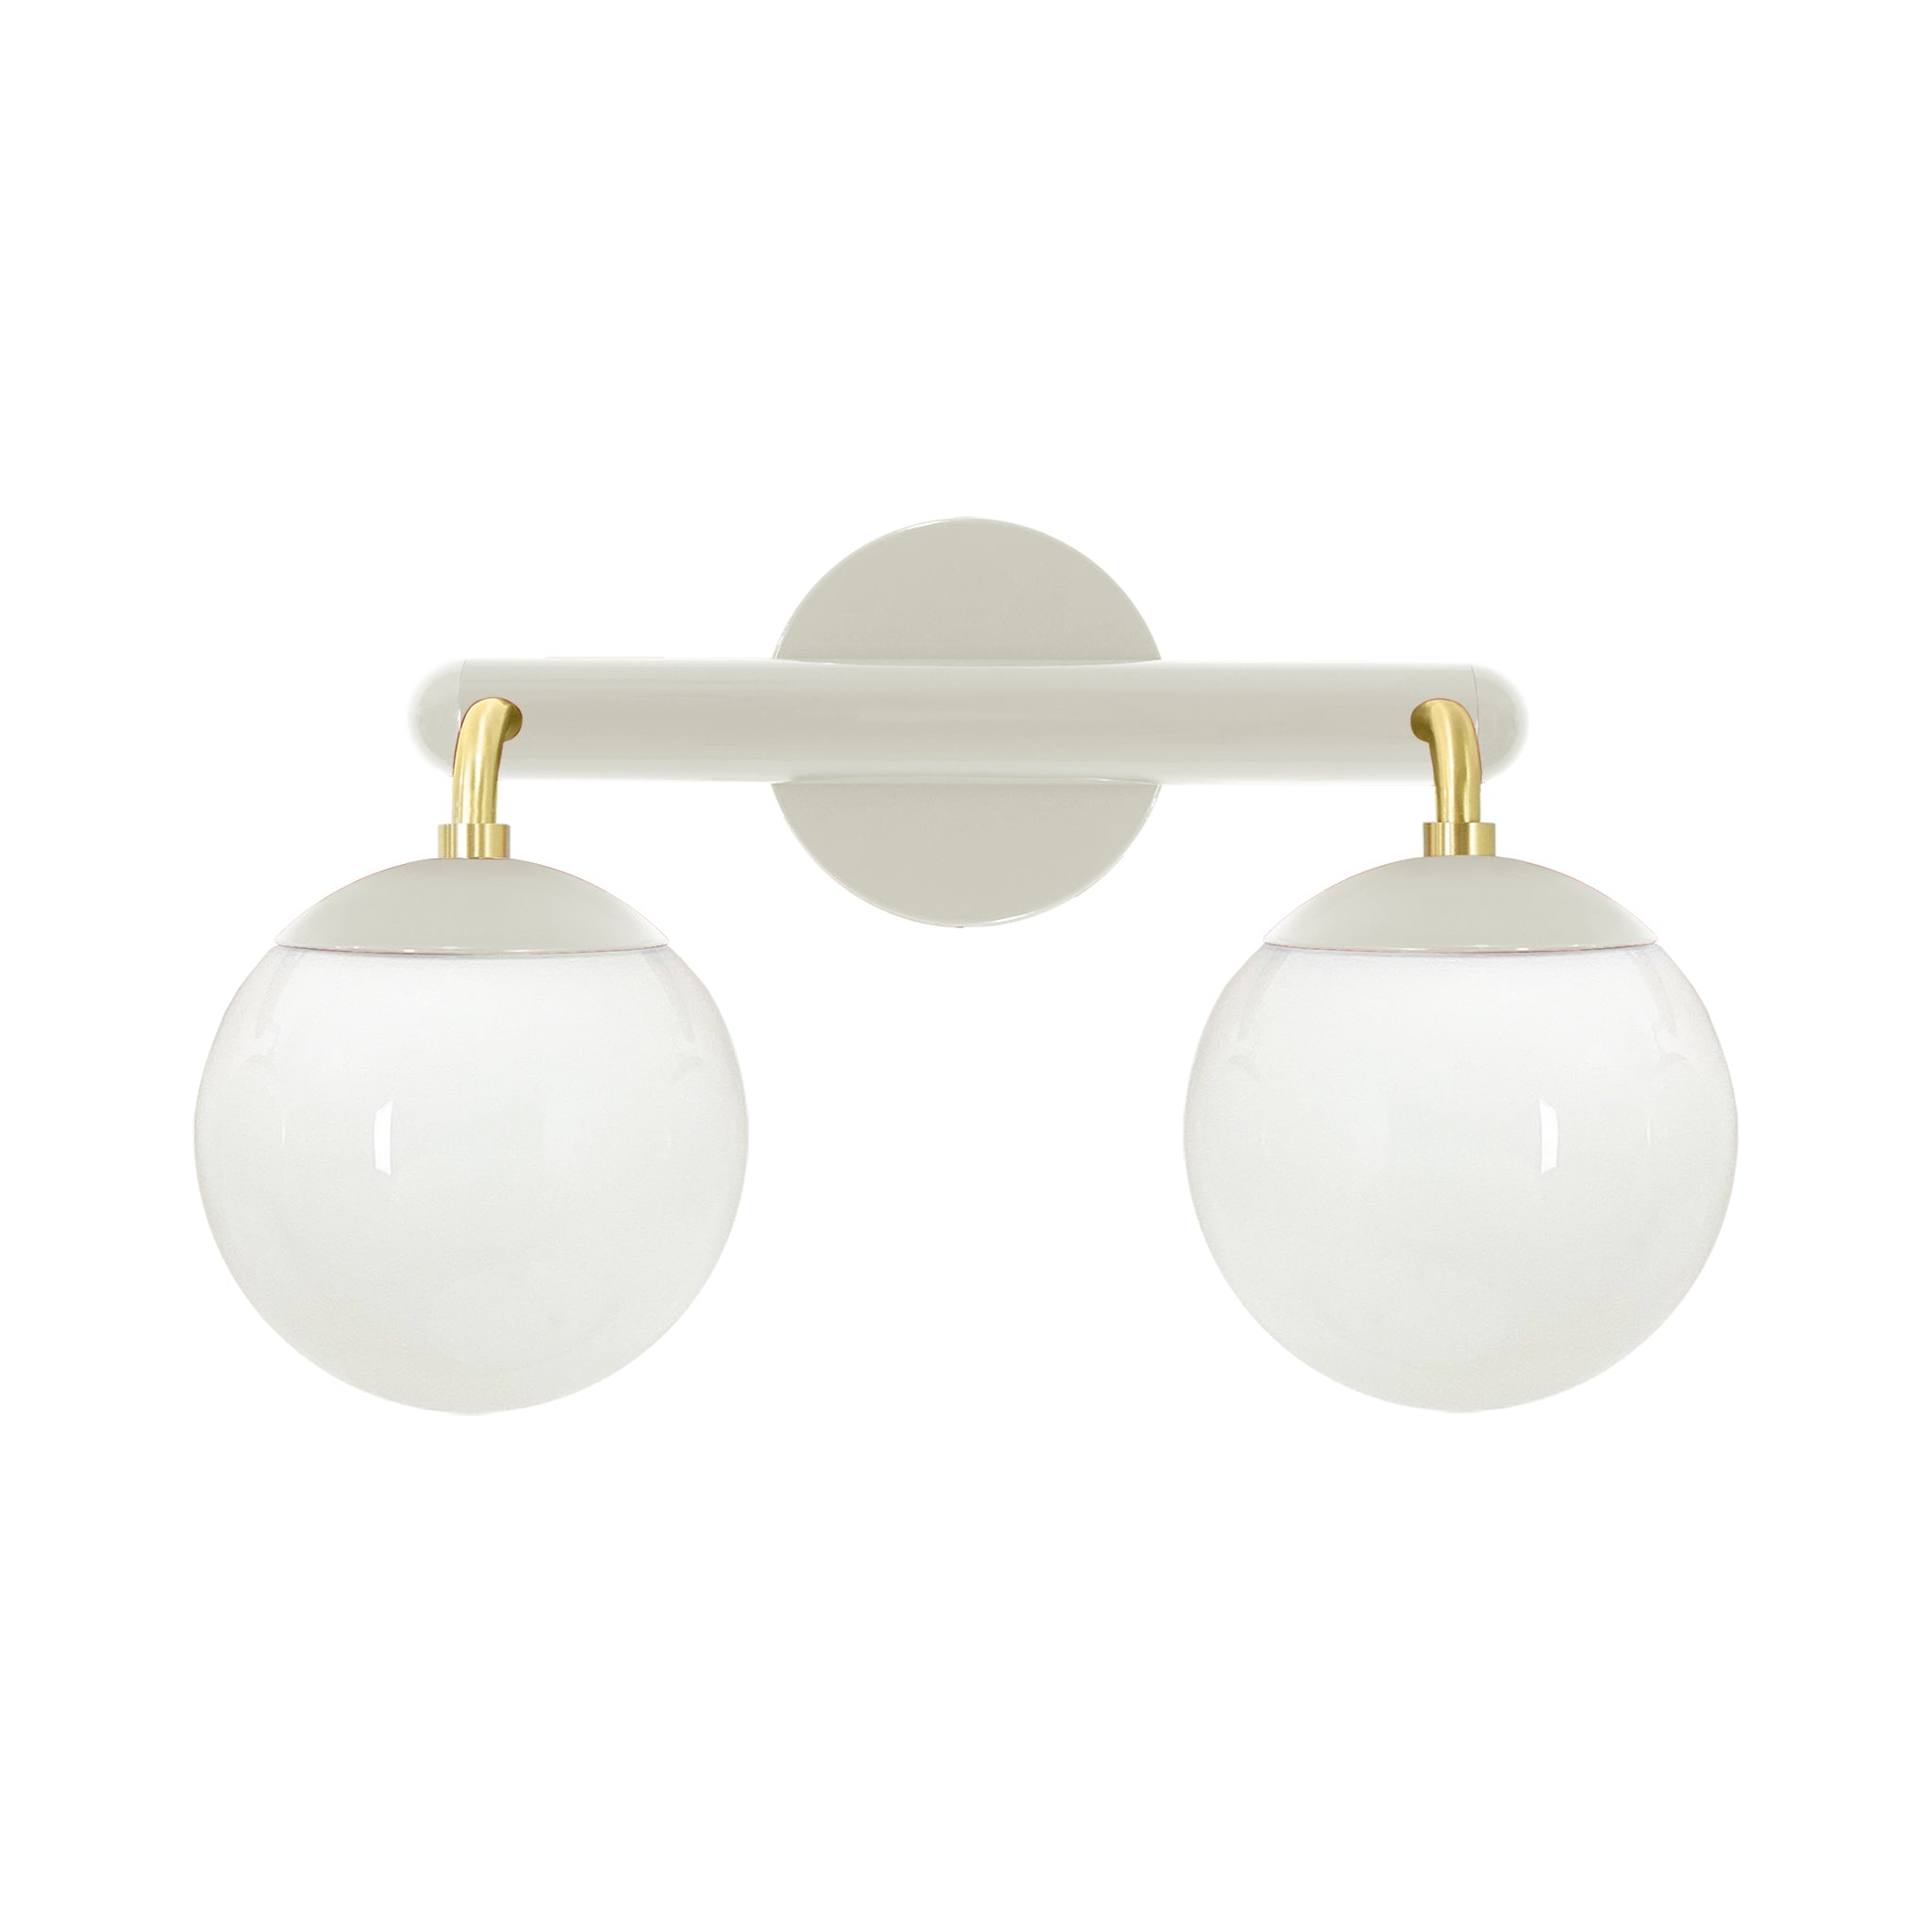 Brass and bone color Legend 2 sconce Dutton Brown lighting